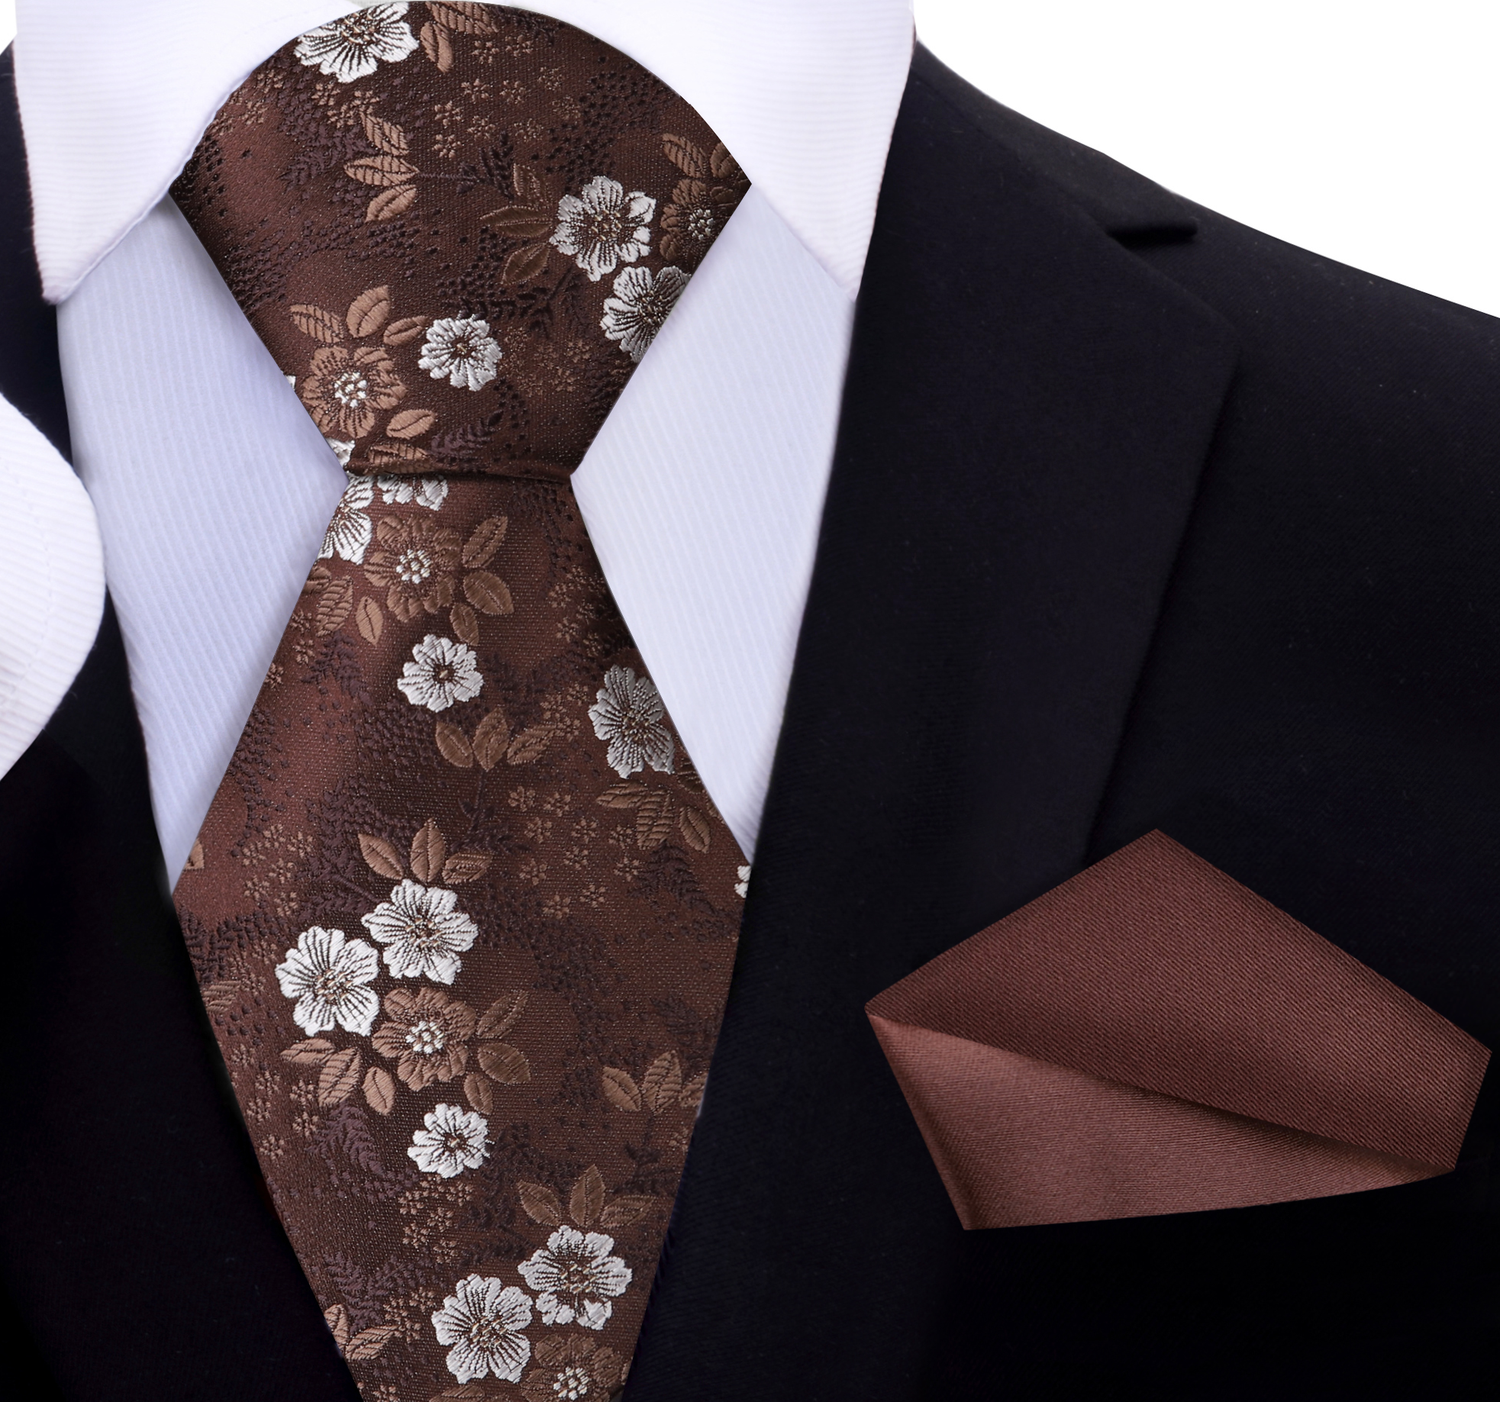 Shades of Brown Floral Tie and Solid Brown Square